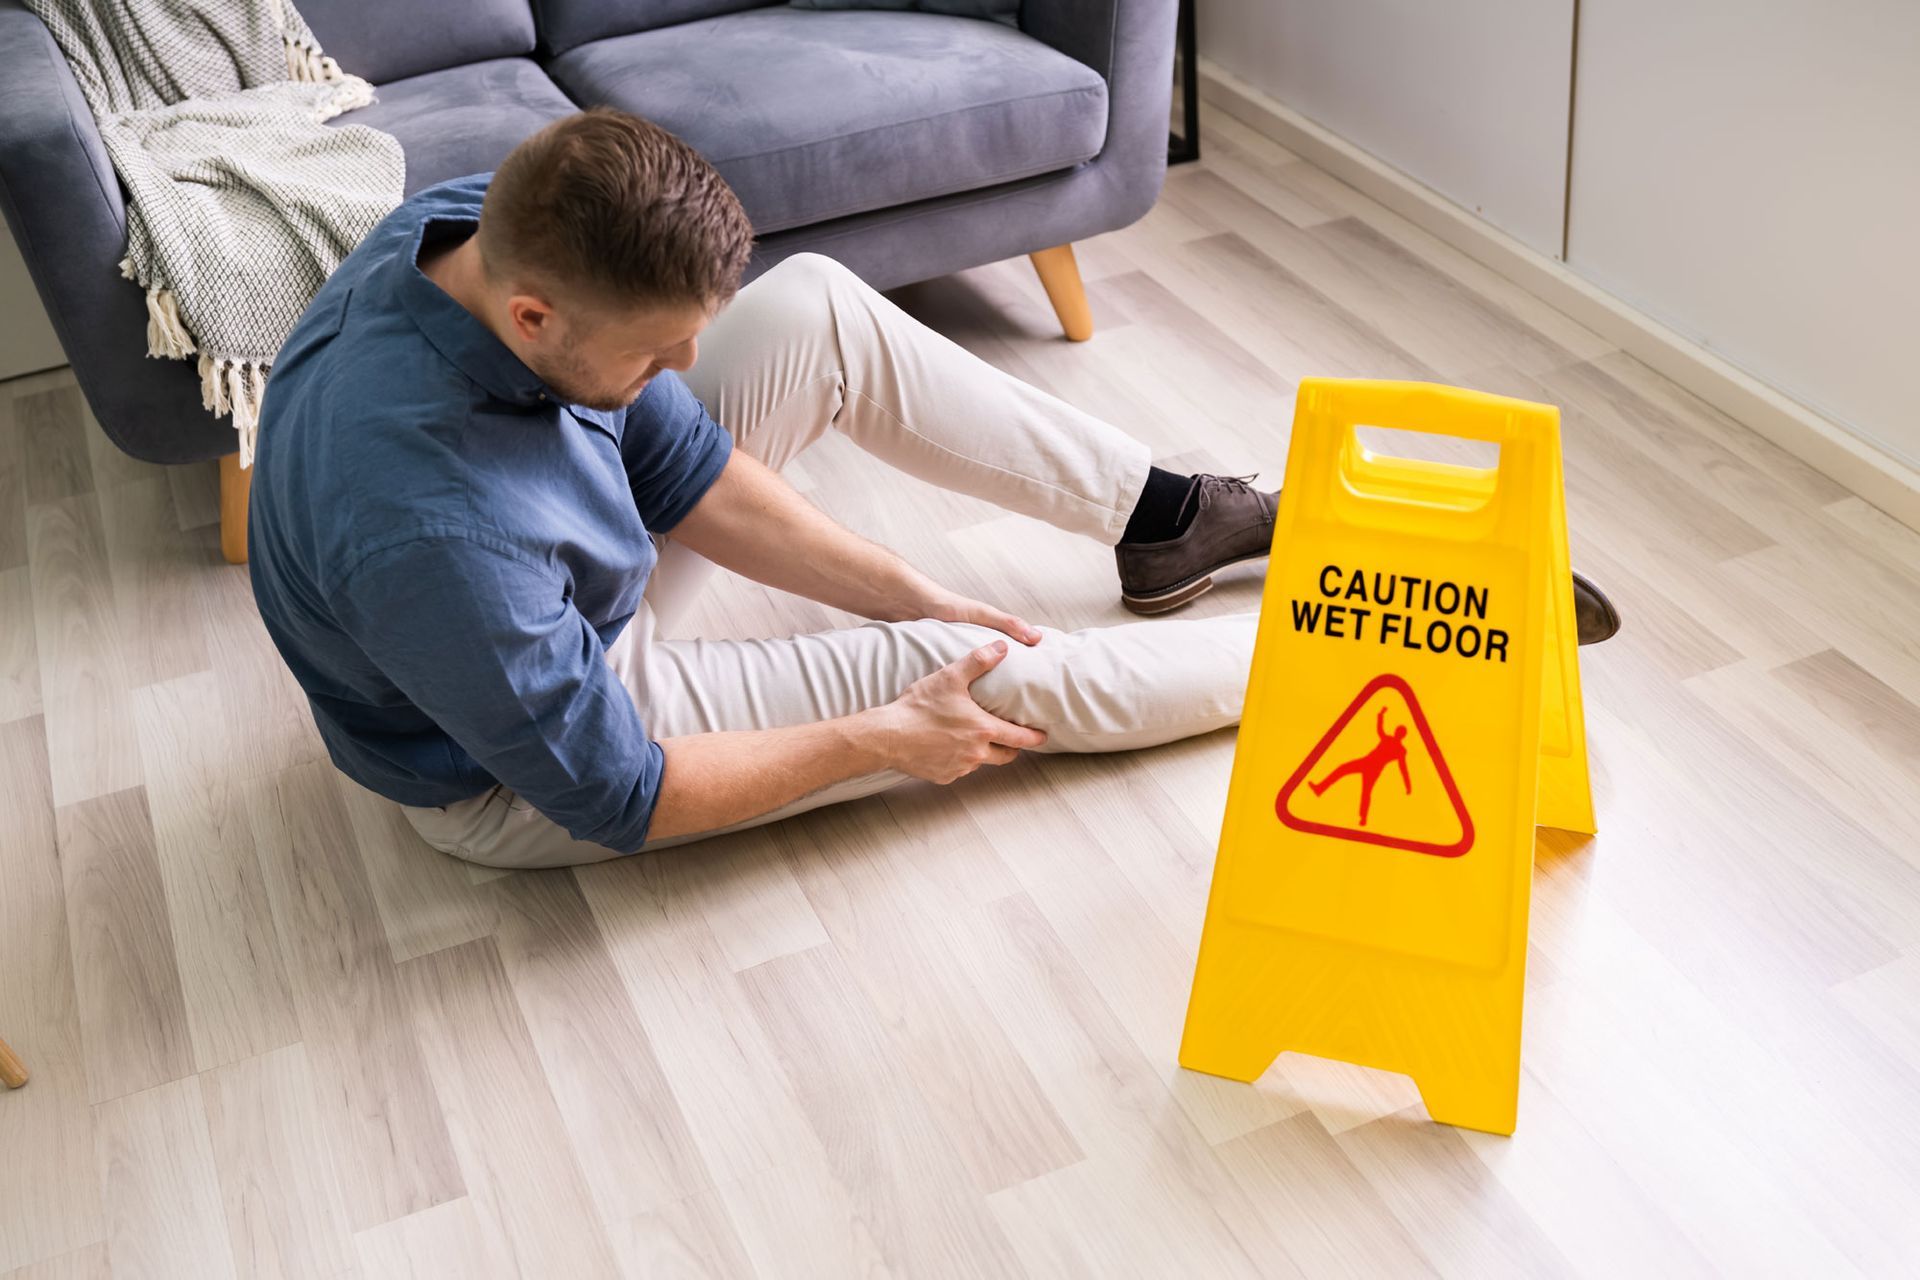 man falling on wet floor in front of caution sign